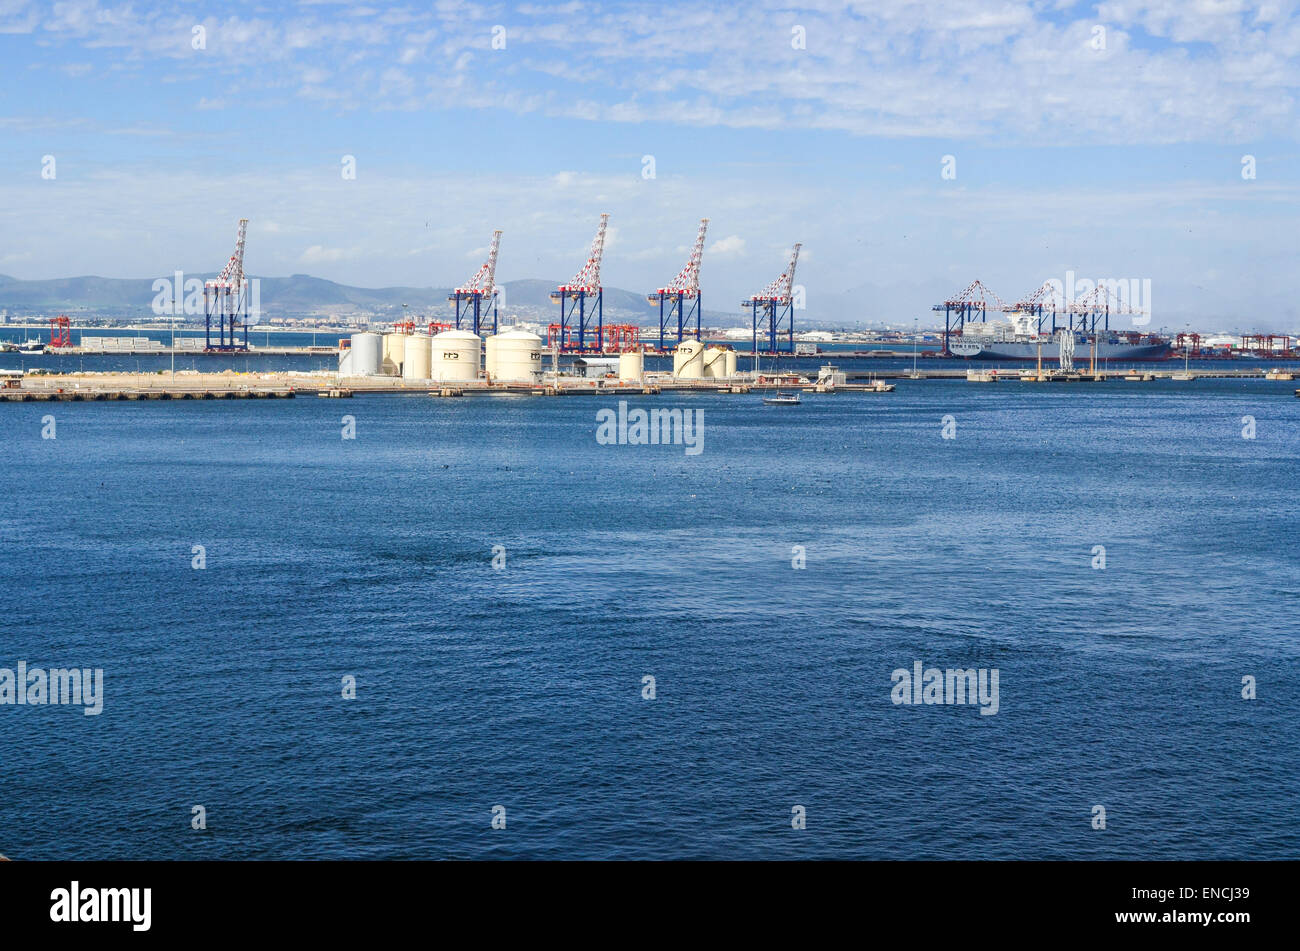 Cranes in the container terminal, port of Cape Town, South Africa Stock Photo